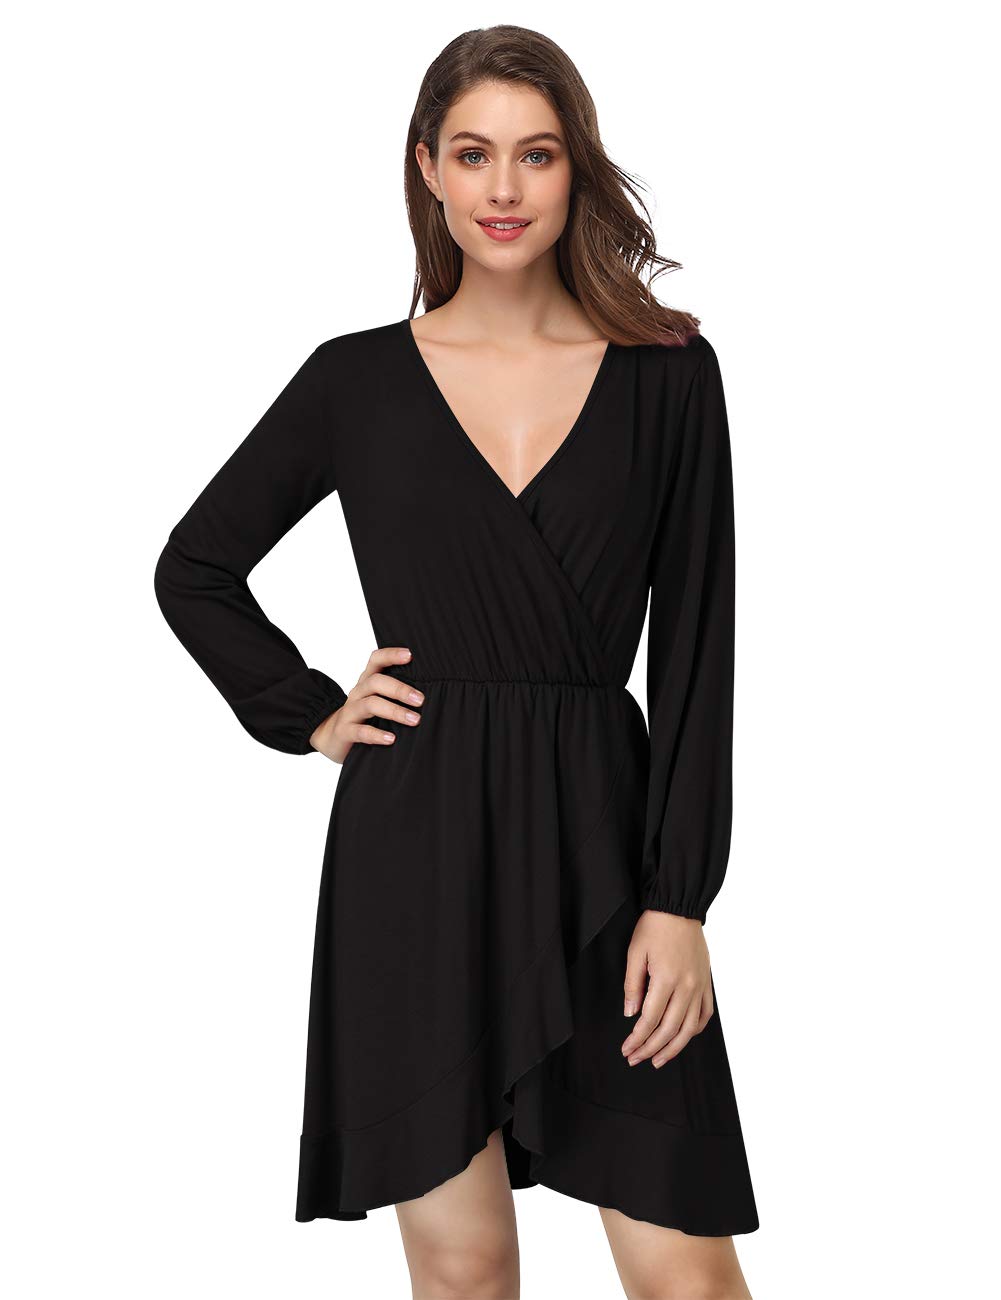 YESFASHION Women's Vneck A-Line Ruffles Cocktail Party Dress Brown